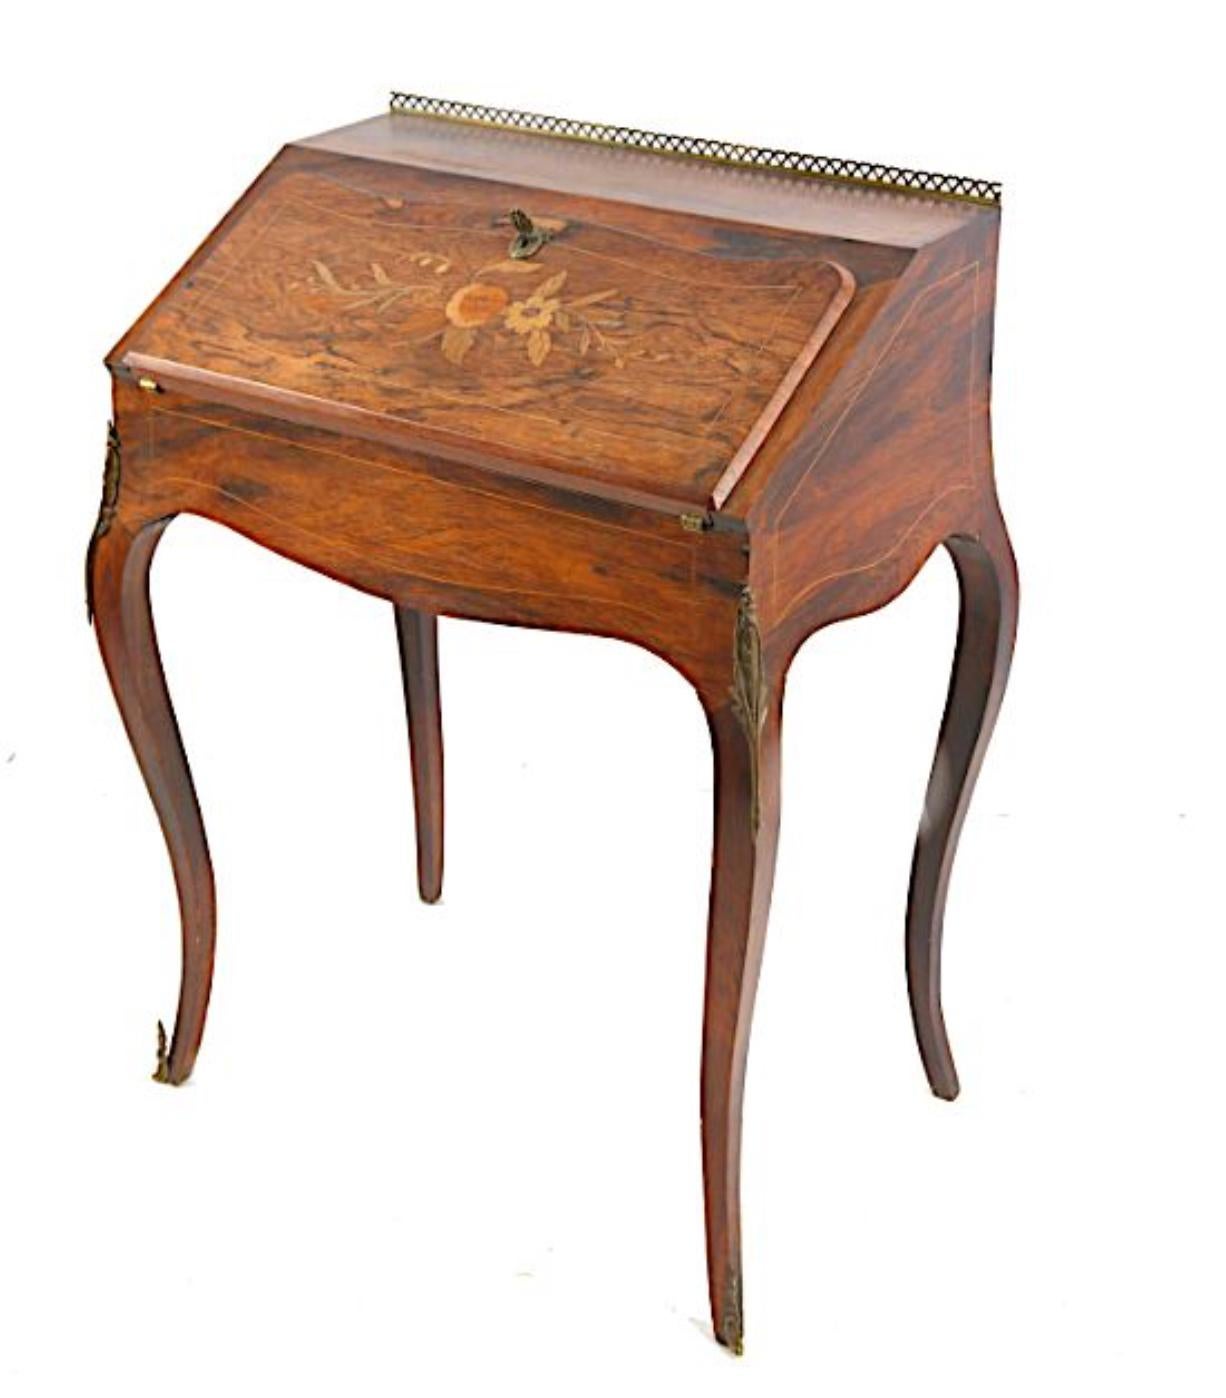 French elegant small desk in palisander veneer, decorated with floral marquetry, revealing drawers, 66X92X43, Louis XV style.